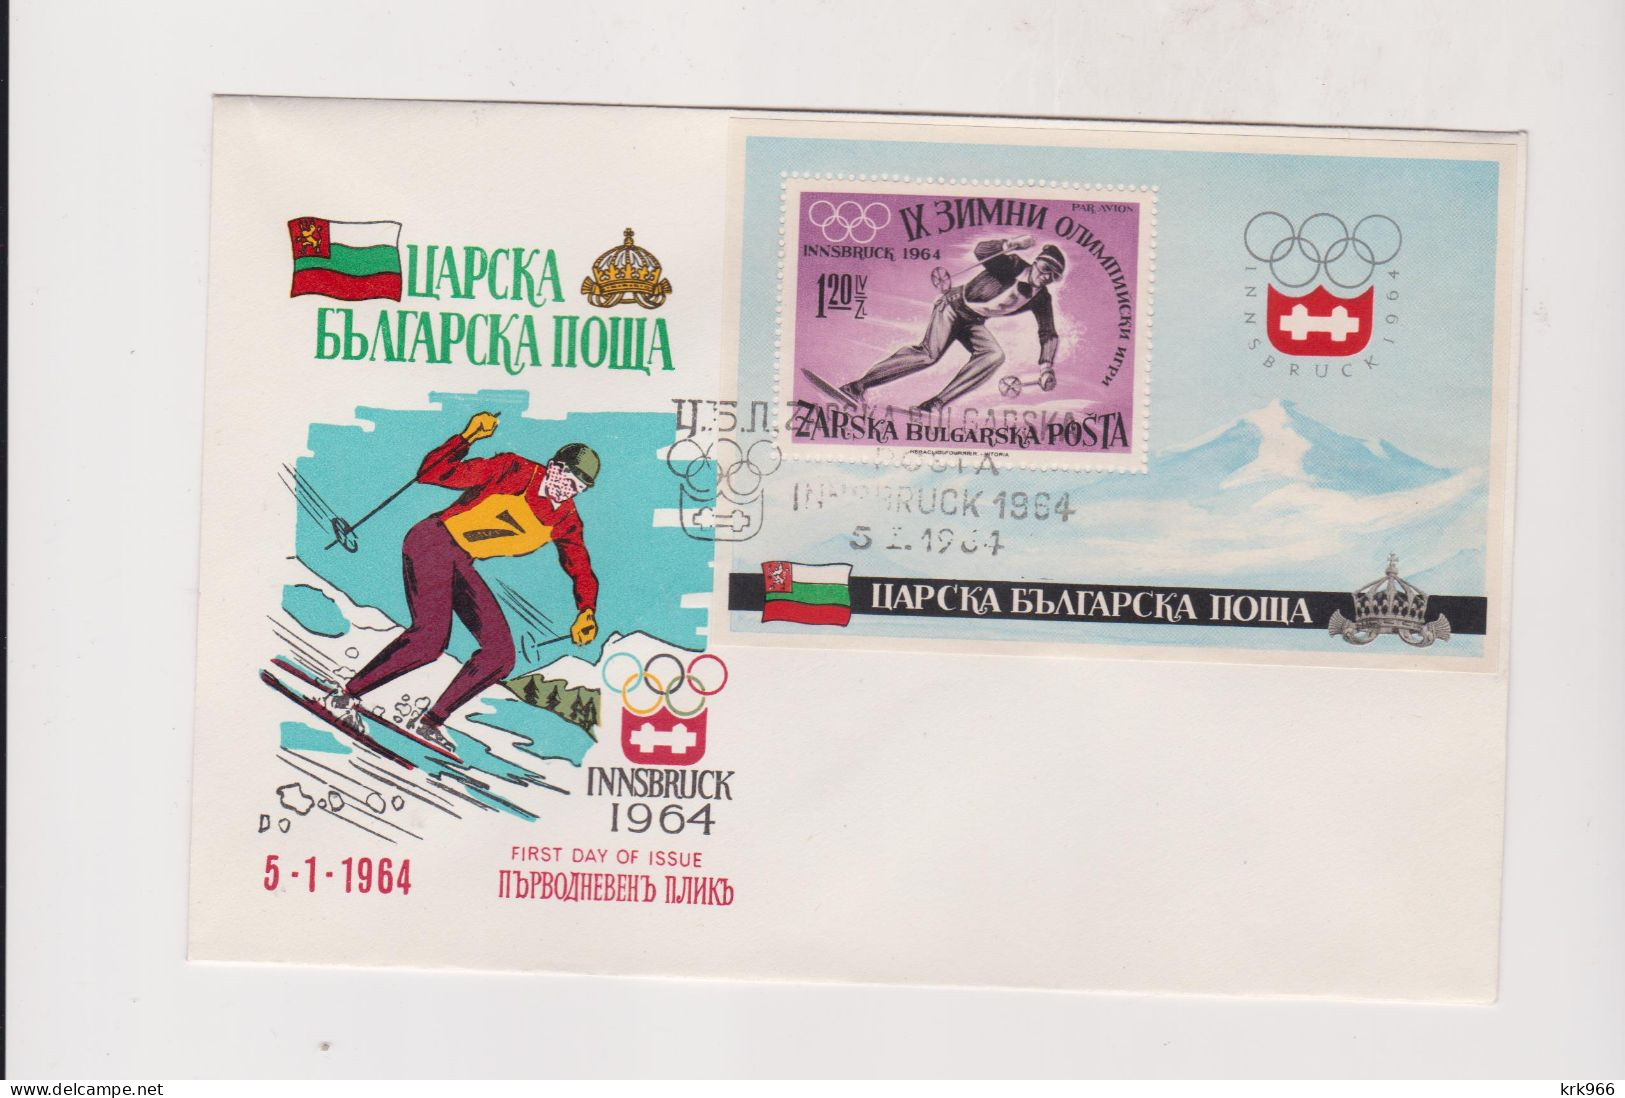 BULGARIA 1964 EXILE OLYMPIC GAMES Perforated Sheet FDC Cover - Briefe U. Dokumente